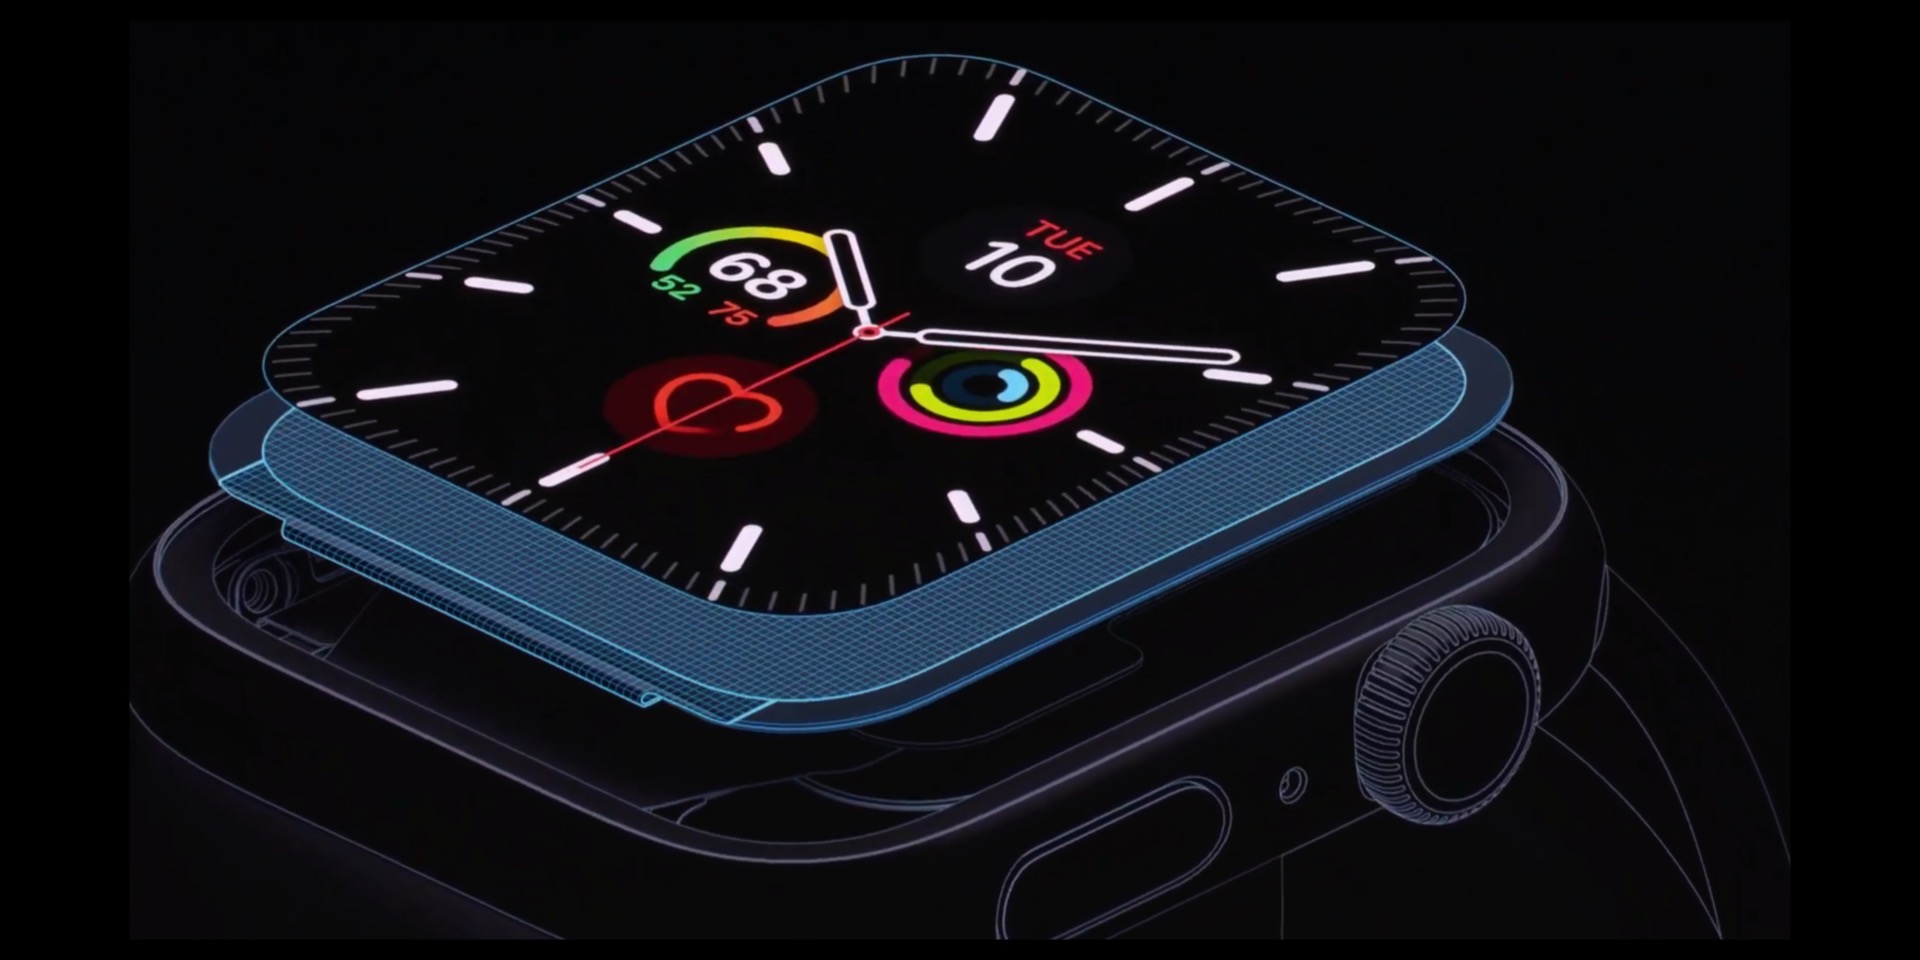 Apple Watch Series 5: Features, Release Date, Price, etc - 9to5Mac